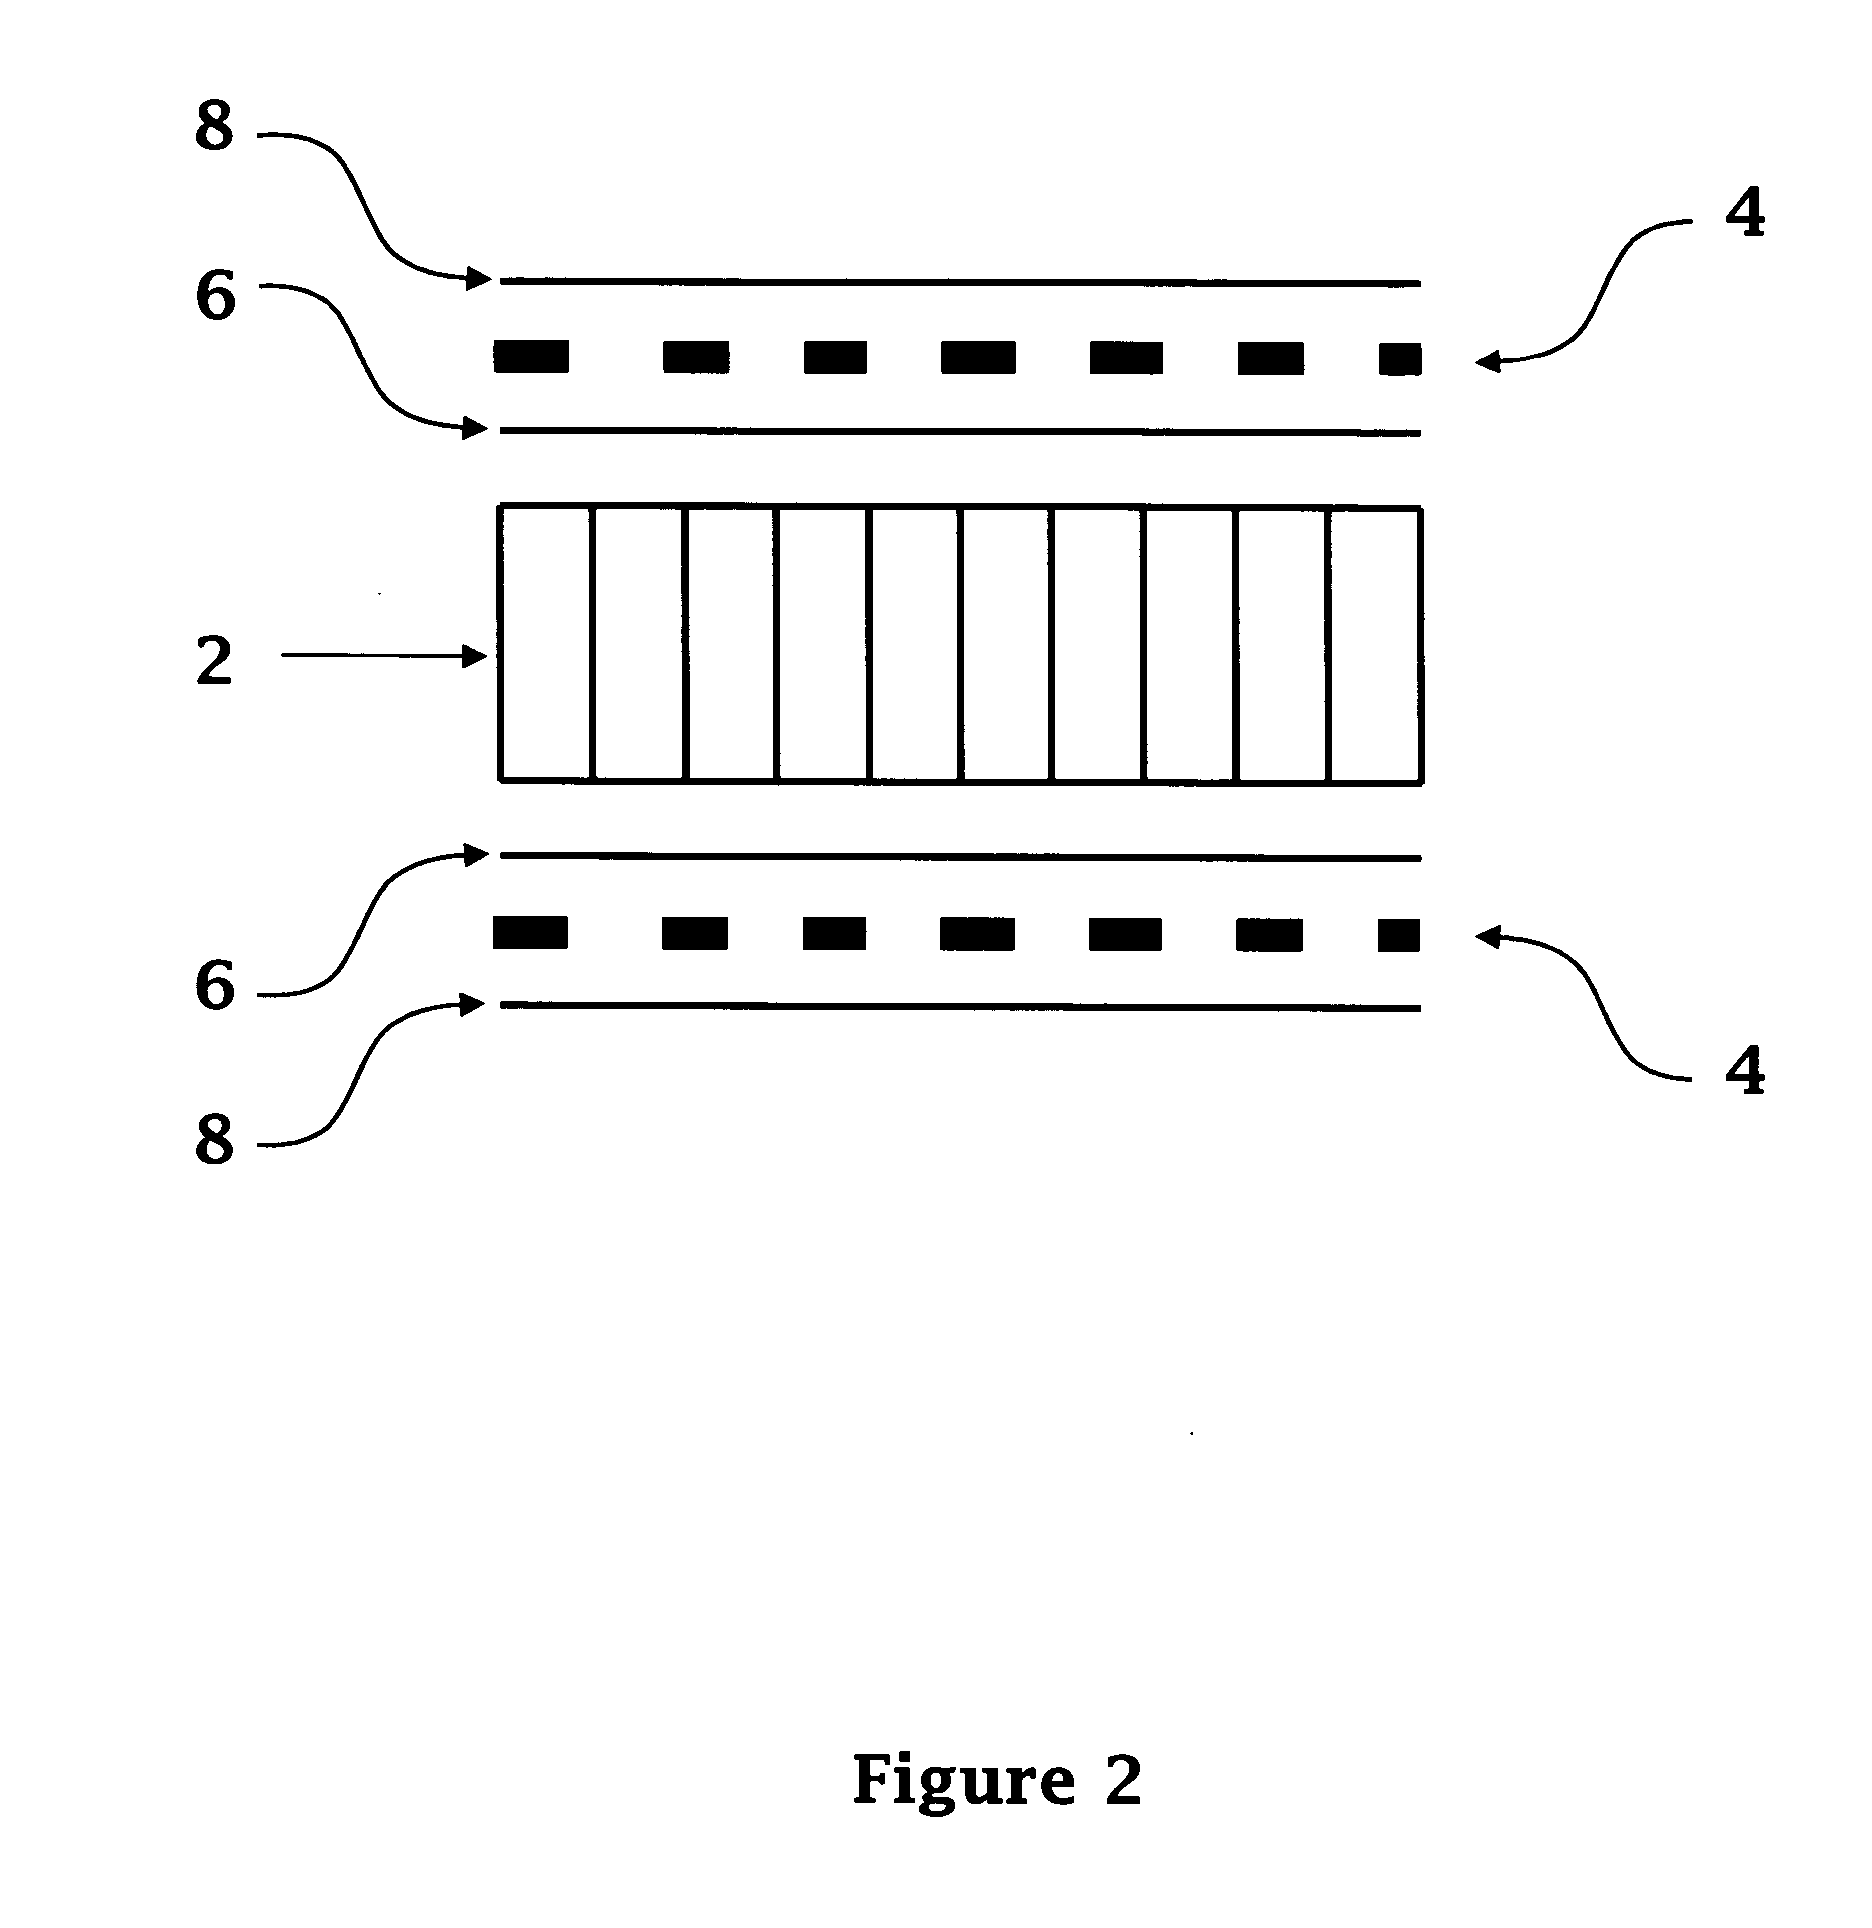 Rigid patient support element for low patient skin damage when used in a radiation therapy environment